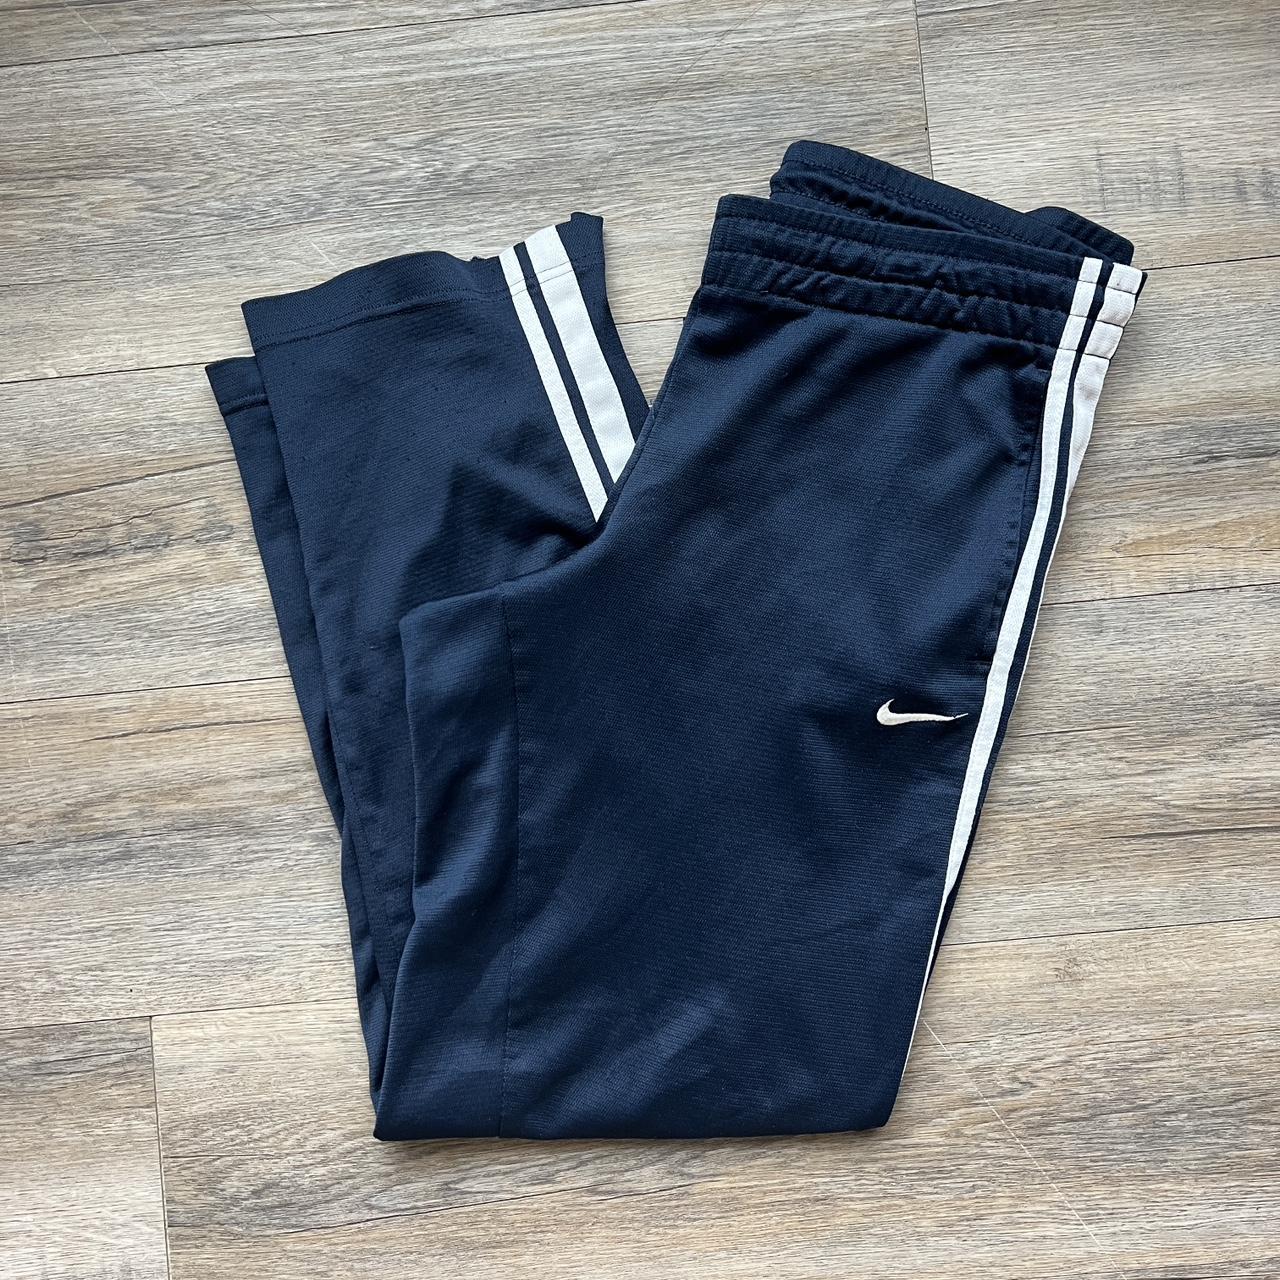 Early 2000’s Nike Sweatpants , -Size: M, -Price:...